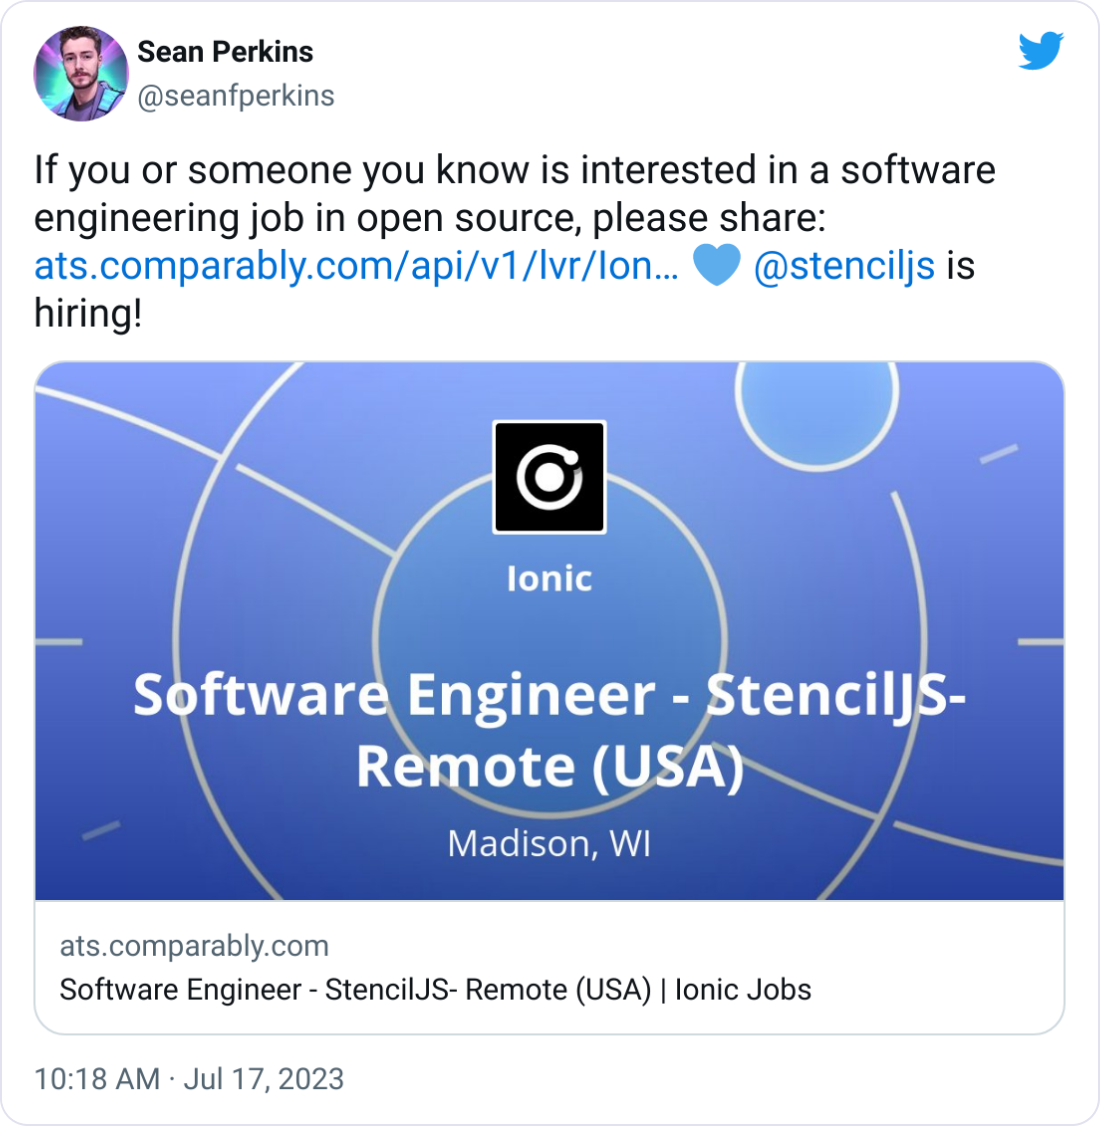 Sean Perkins @seanfperkins If you or someone you know is interested in a software engineering job in open source, please share: https://ats.comparably.com/api/v1/lvr/Ionic/82928991-7dbb-444f-857d-10e74ea2ec12 💙  @stenciljs  is hiring!